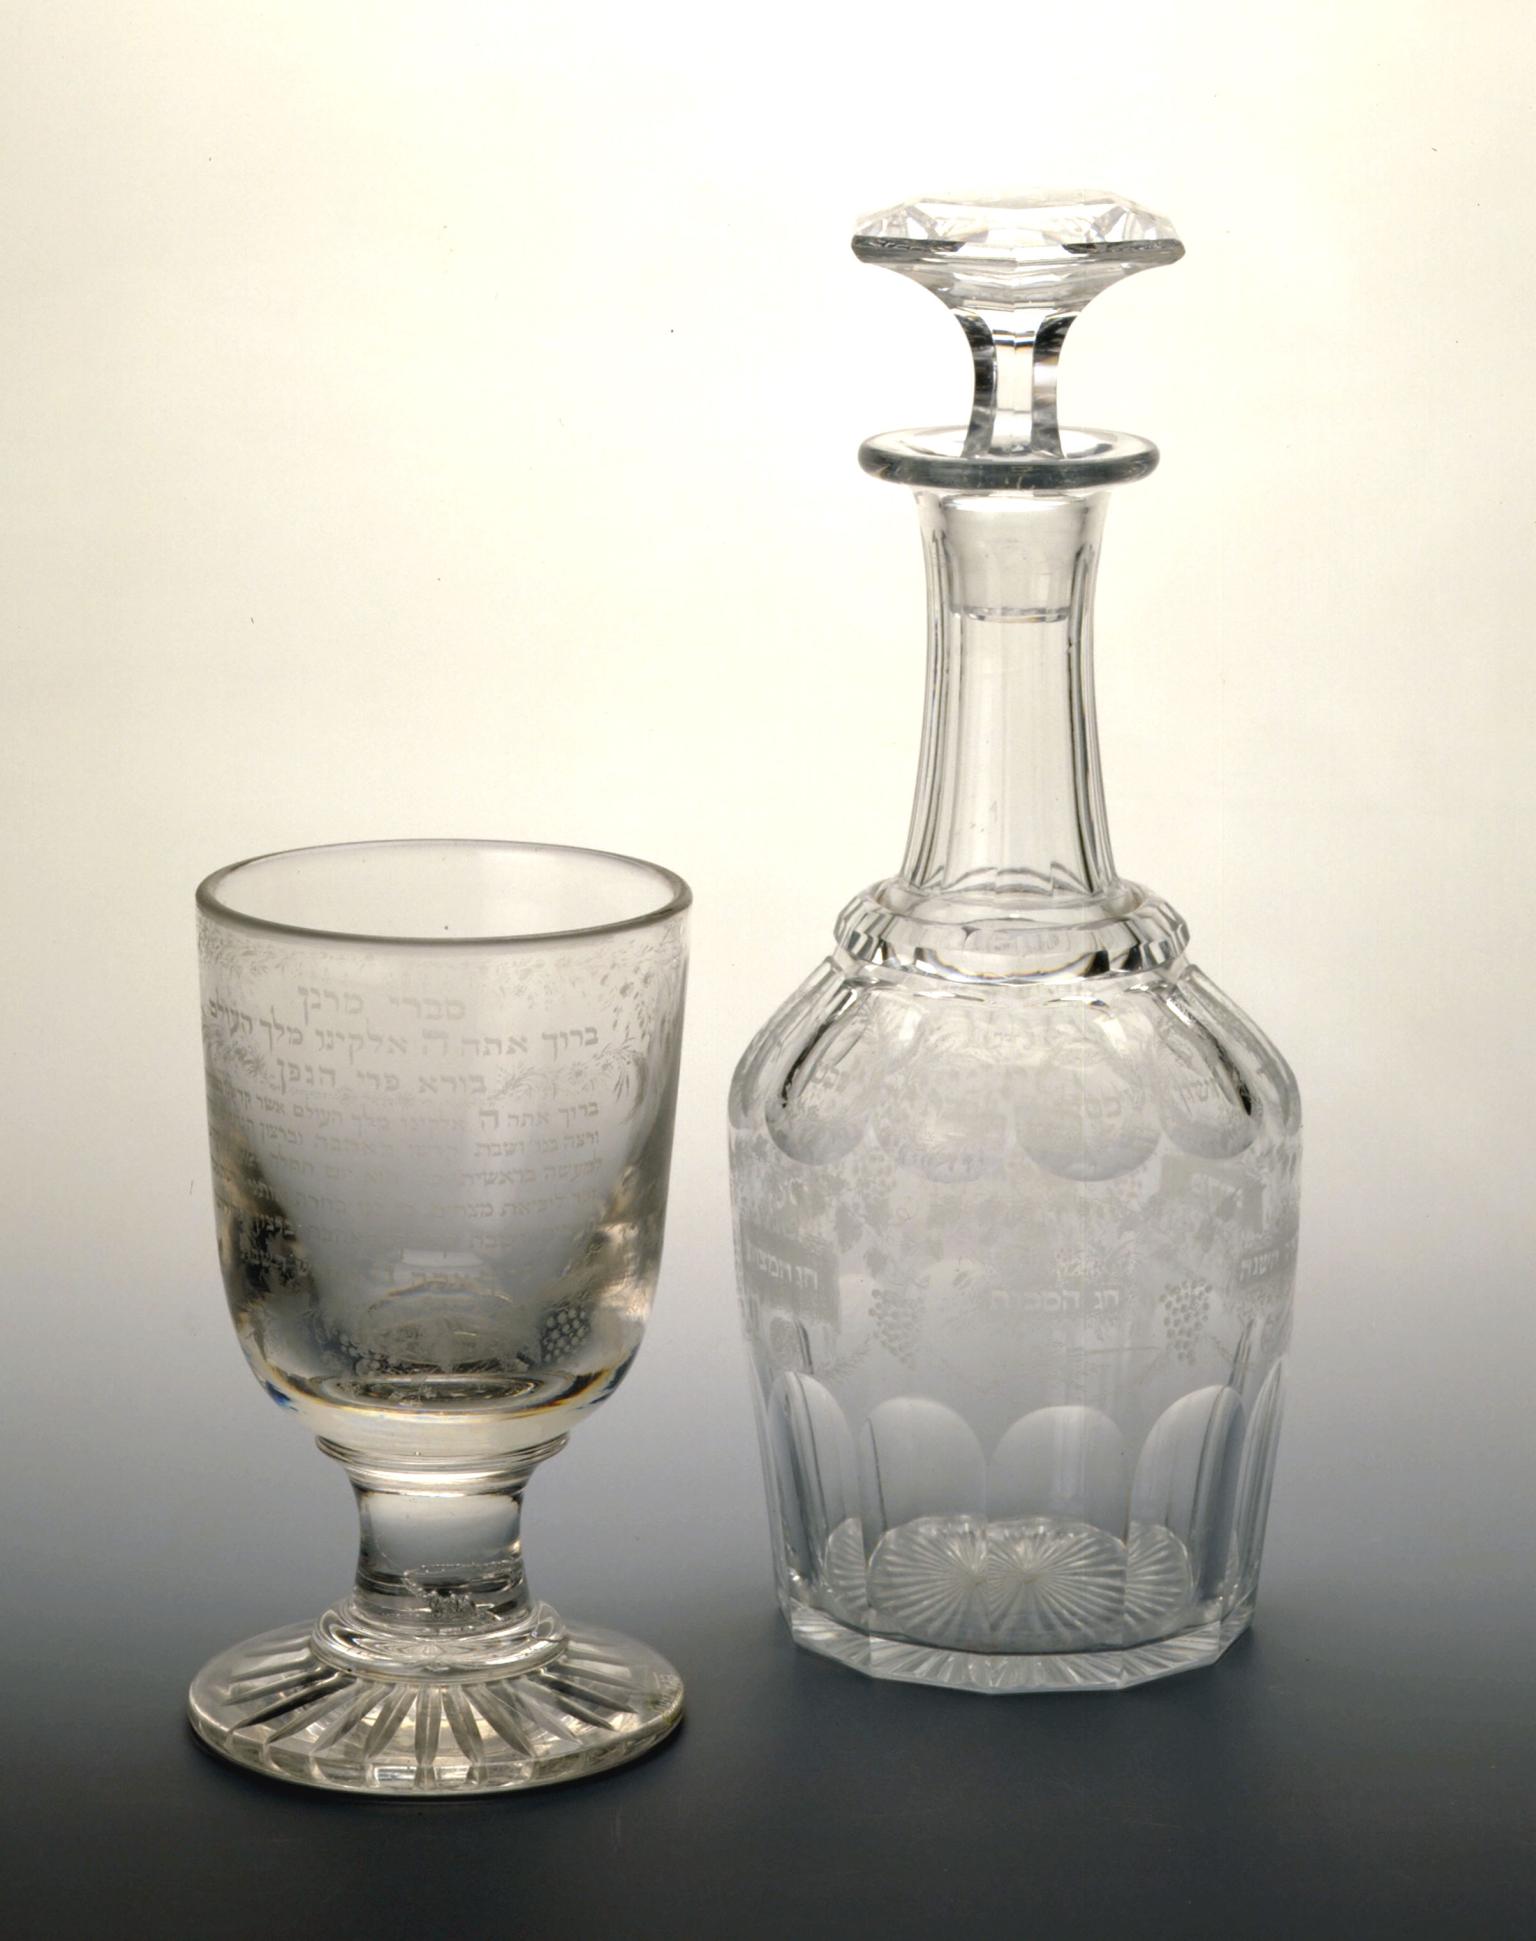 Glass cup and carafe with designs and Hebrew text etched on the outside.